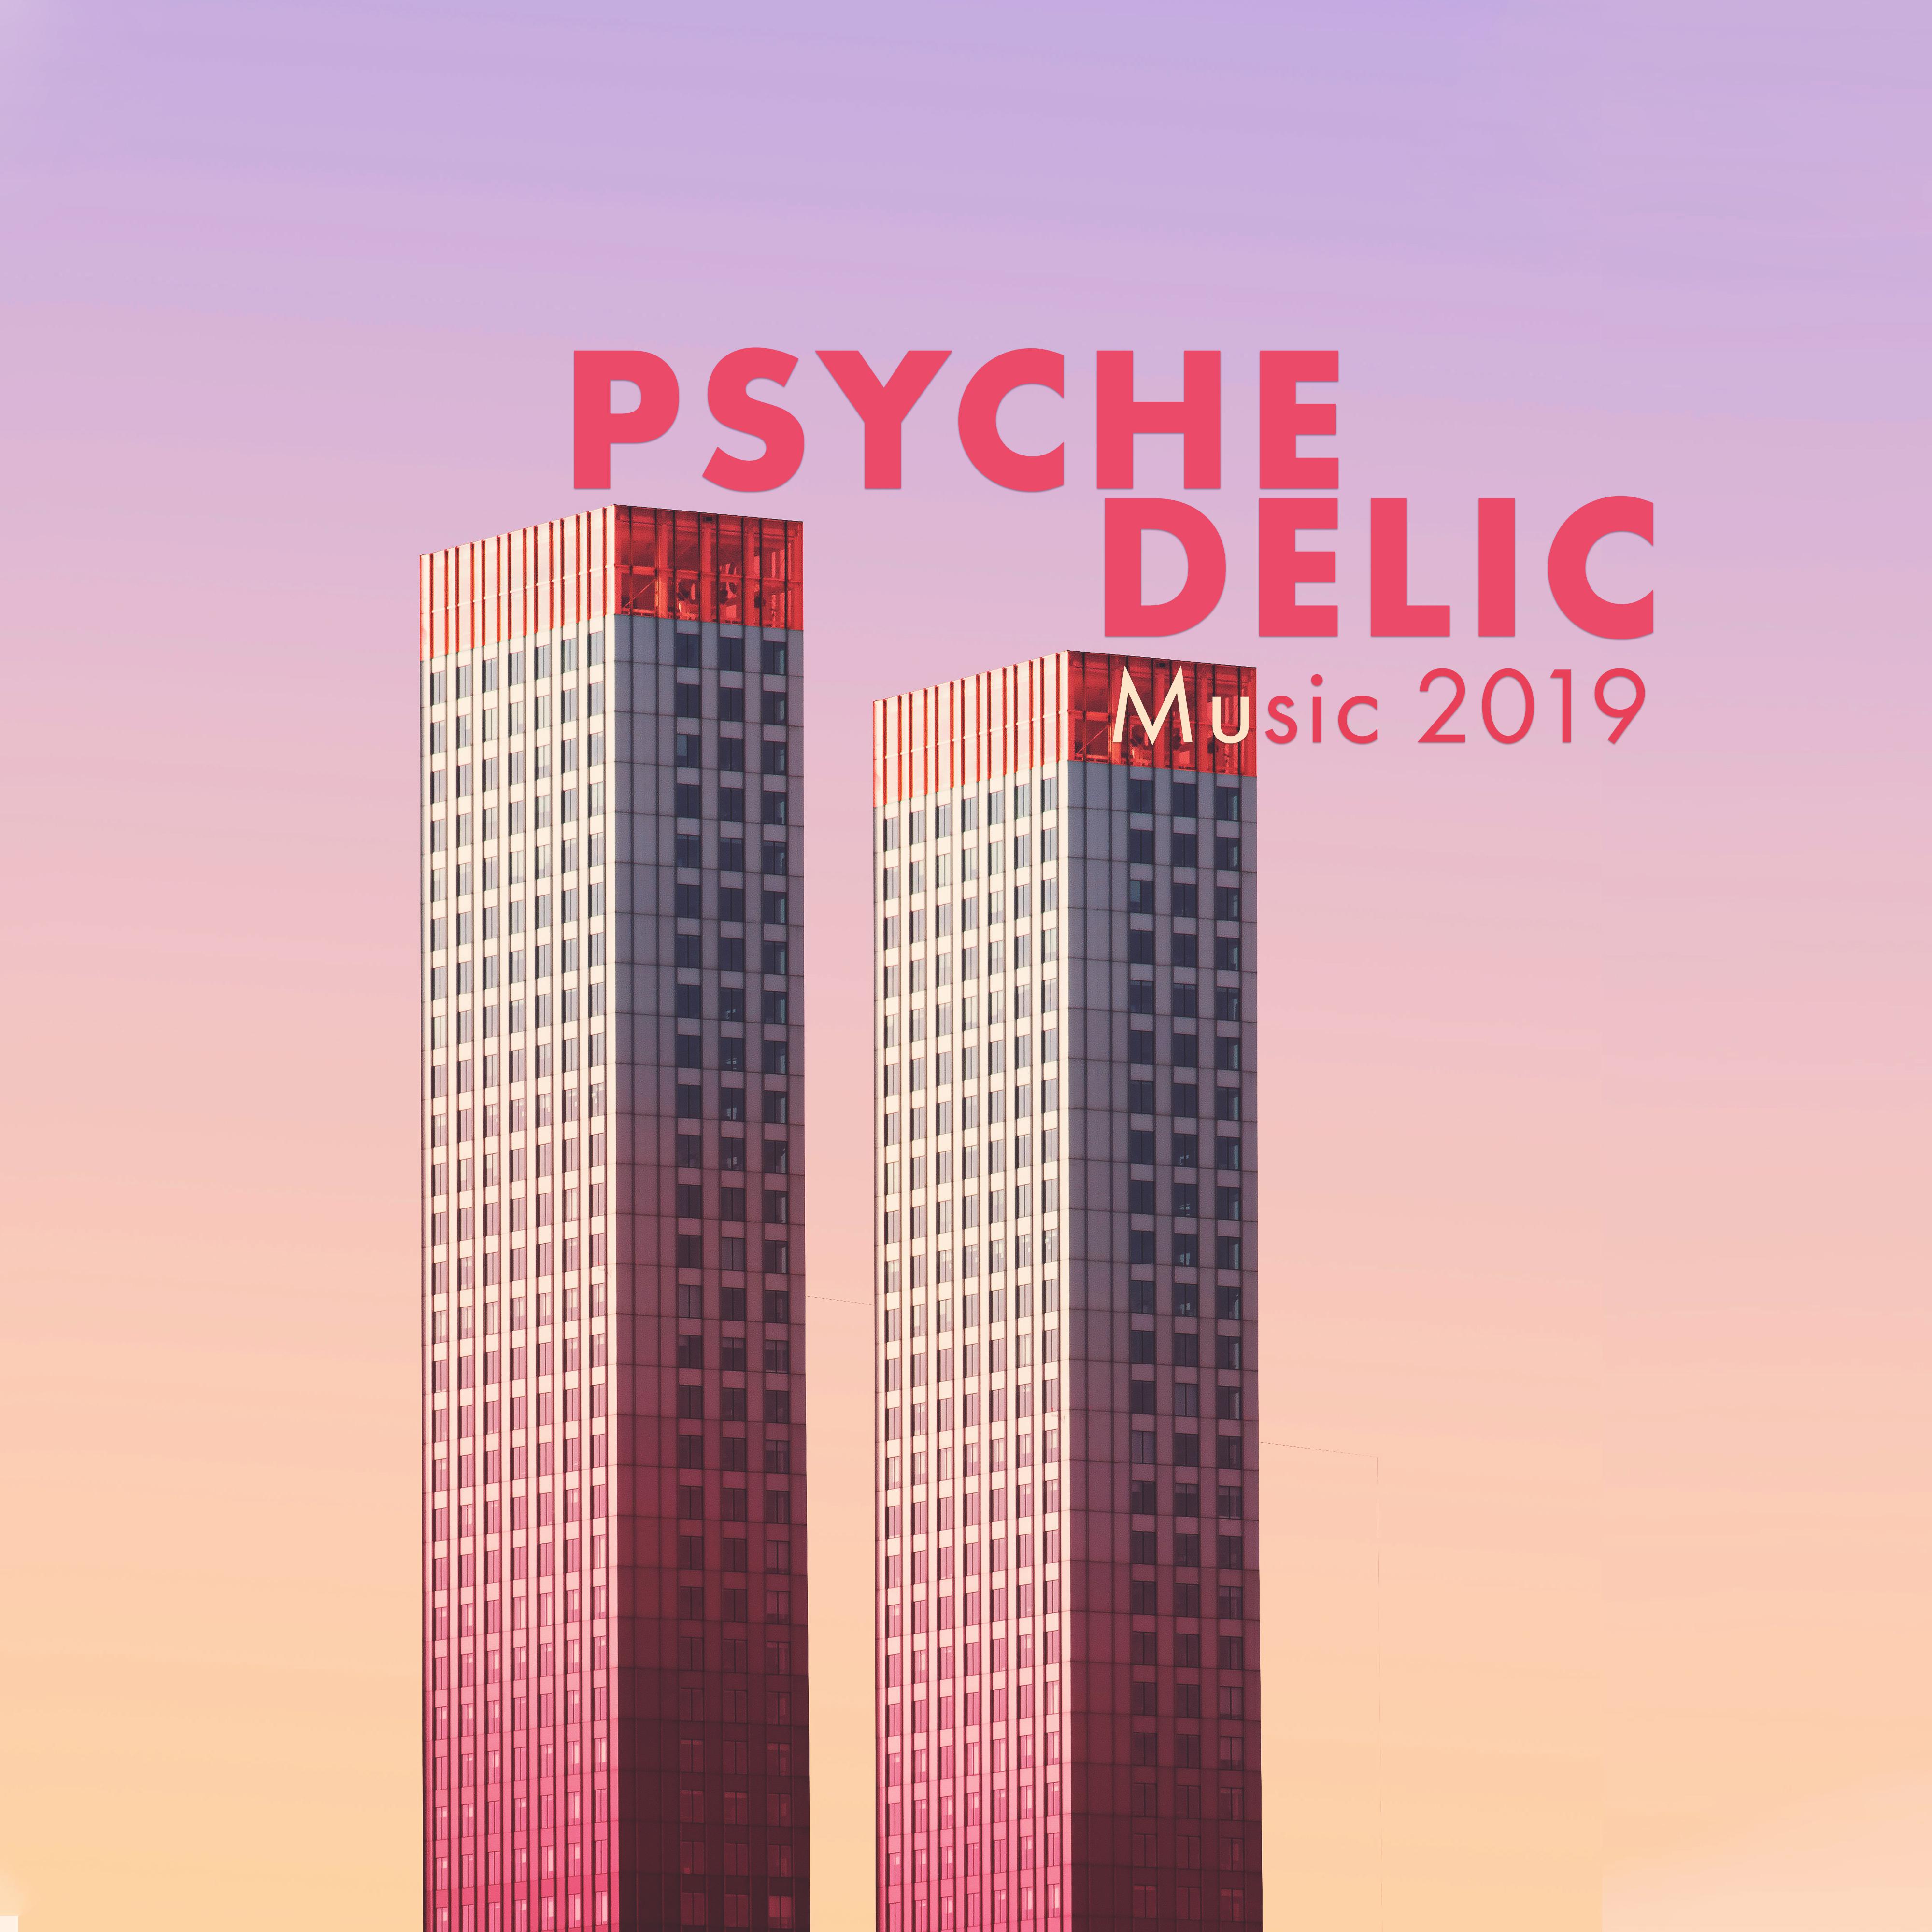 Psychedelic Music 2019 (Chillout Edition)